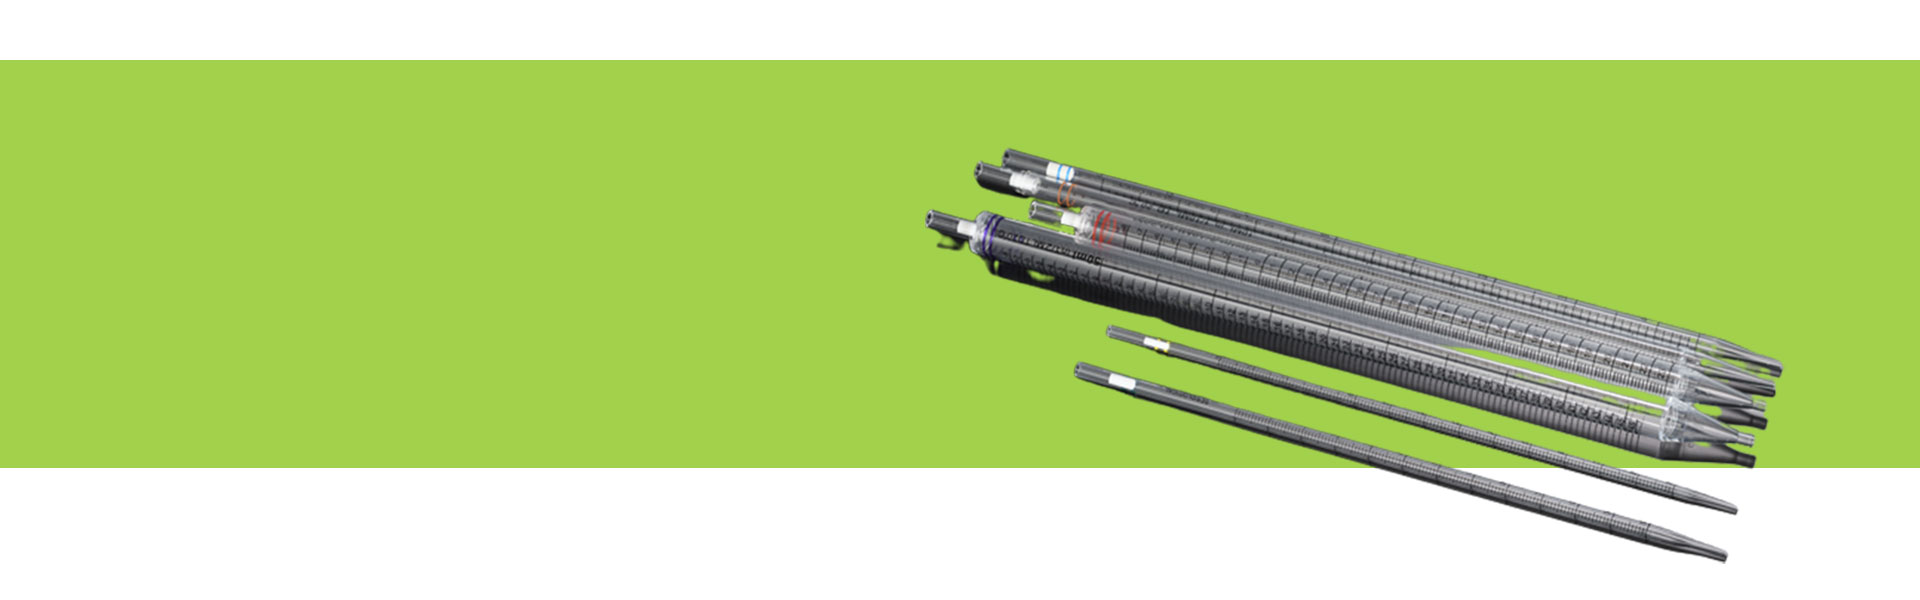 MDHC Serological Pipette from China